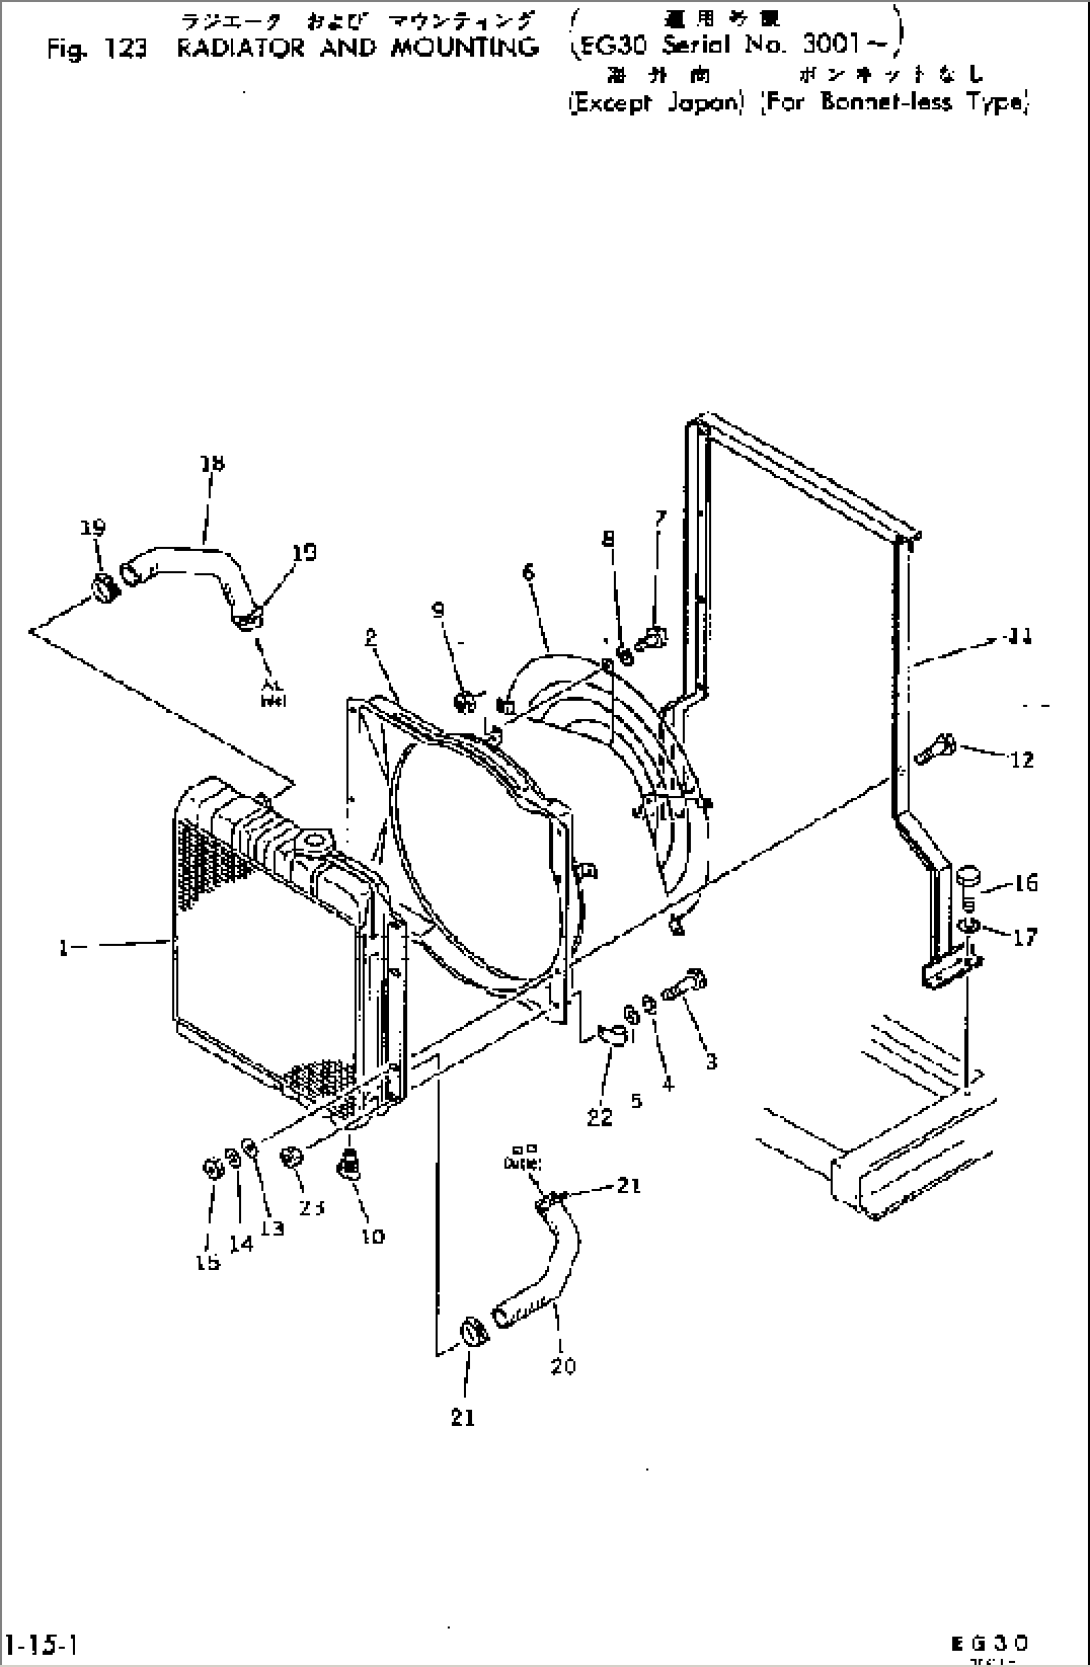 RADIATOR AND MOUNTING (BONNET-LESS TYPE) (EXCEPT JAPAN)